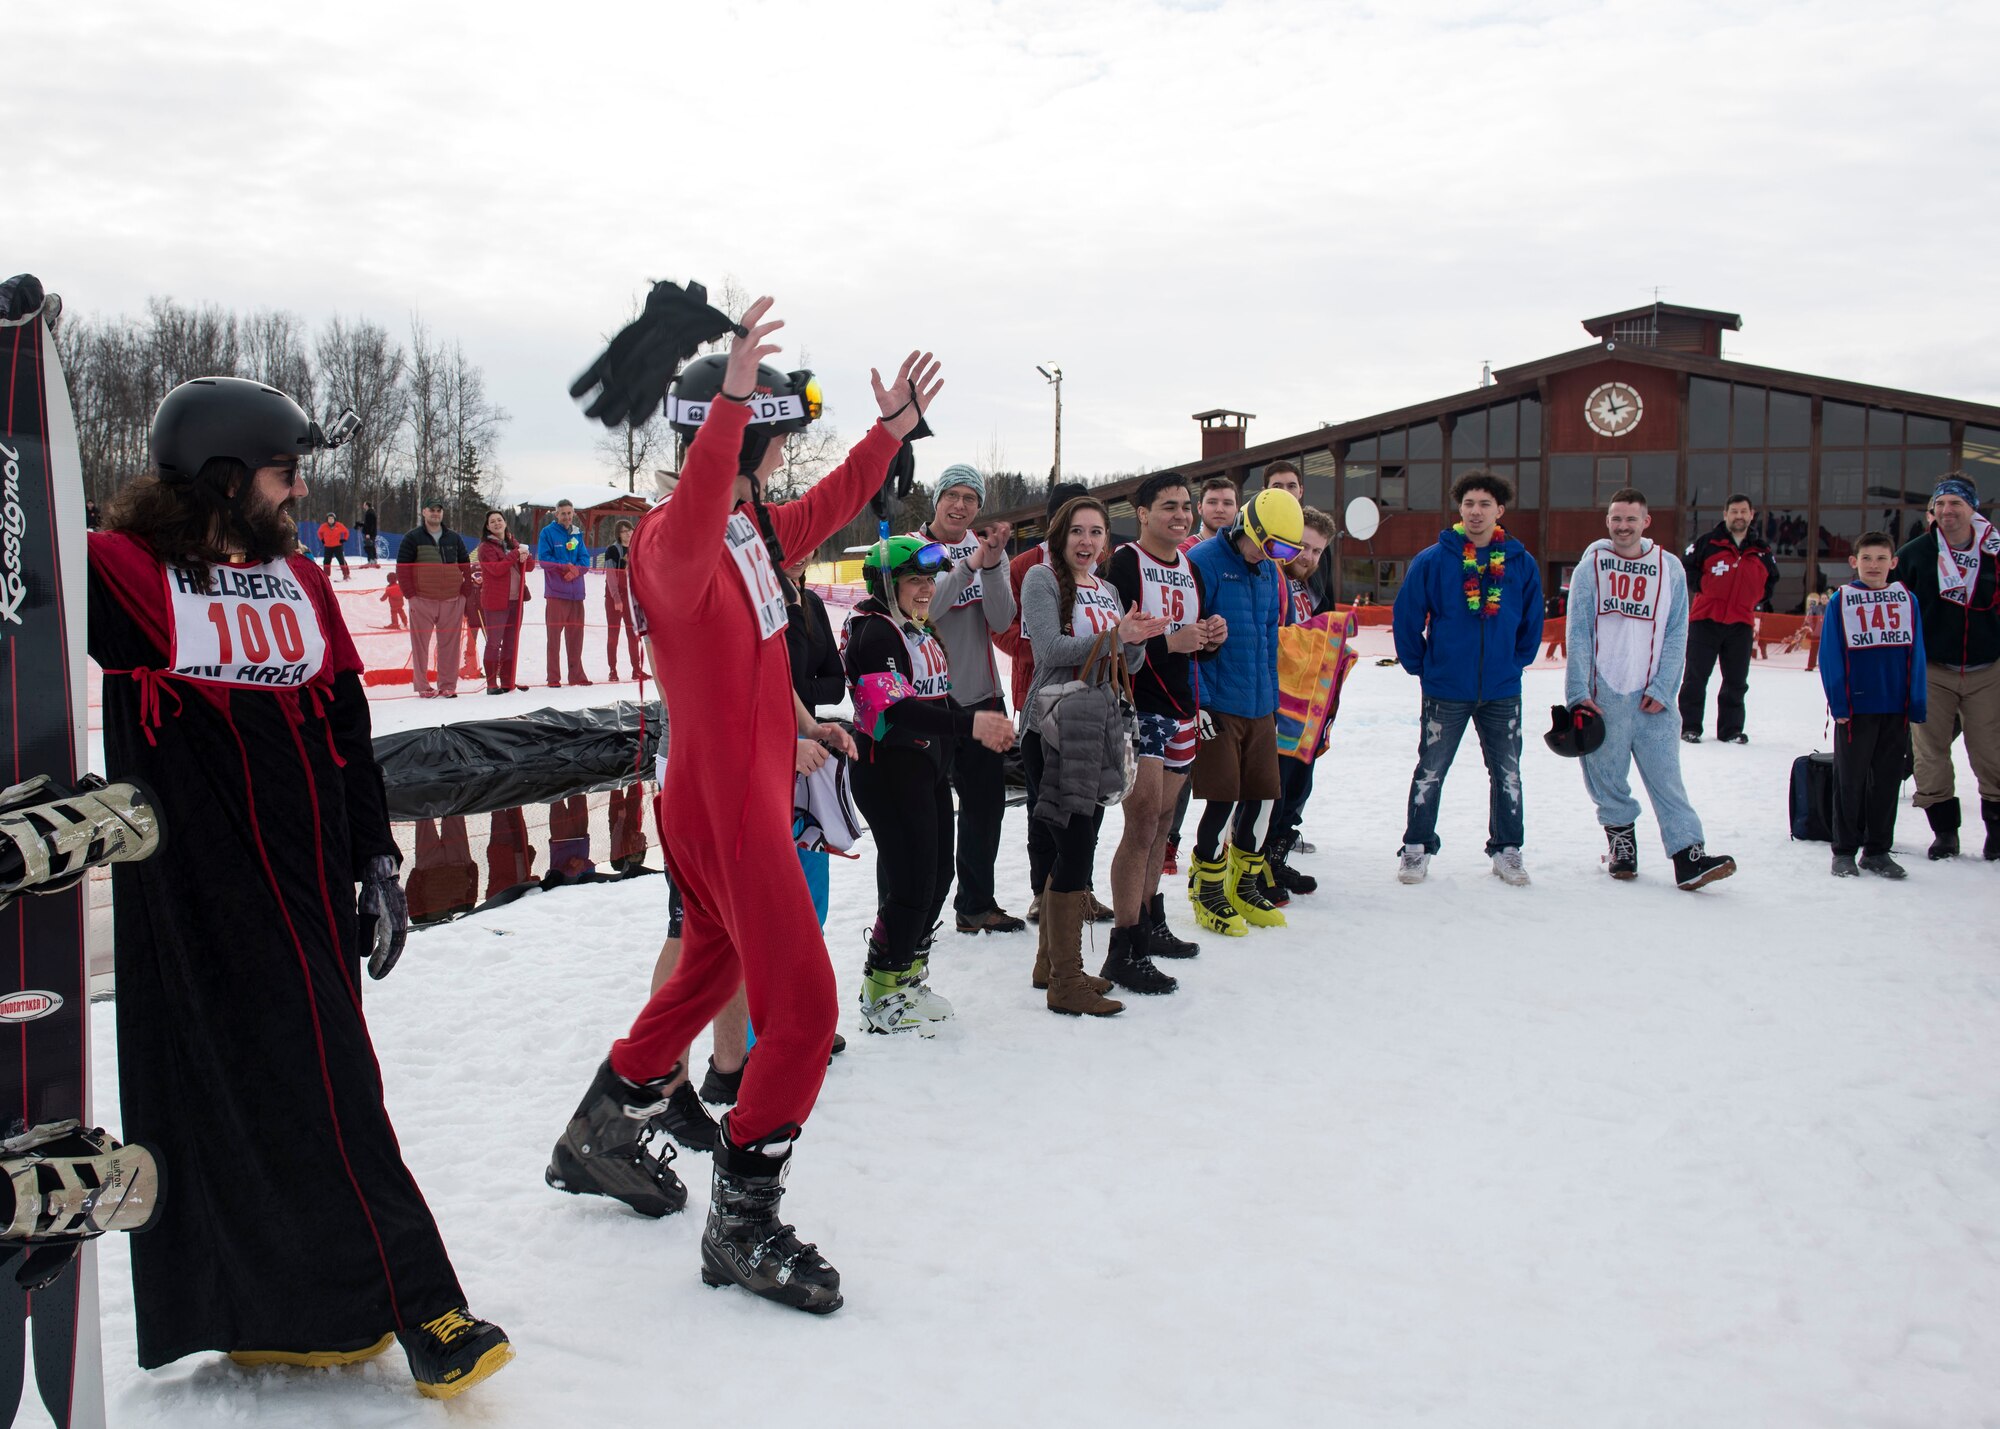 The 2018 Slush Cup participants congratulate the winners at the Joint Base Elmendorf-Richardson Hillberg Ski Area, March 18, 2018.The Slush Cup is a two-fold annual event celebrating the change in weather, consisting of skiers and snowboarders trying to make it across a man-made slush pond without falling. This year included Best Splash and Best overall categories as well as second and third place winners.